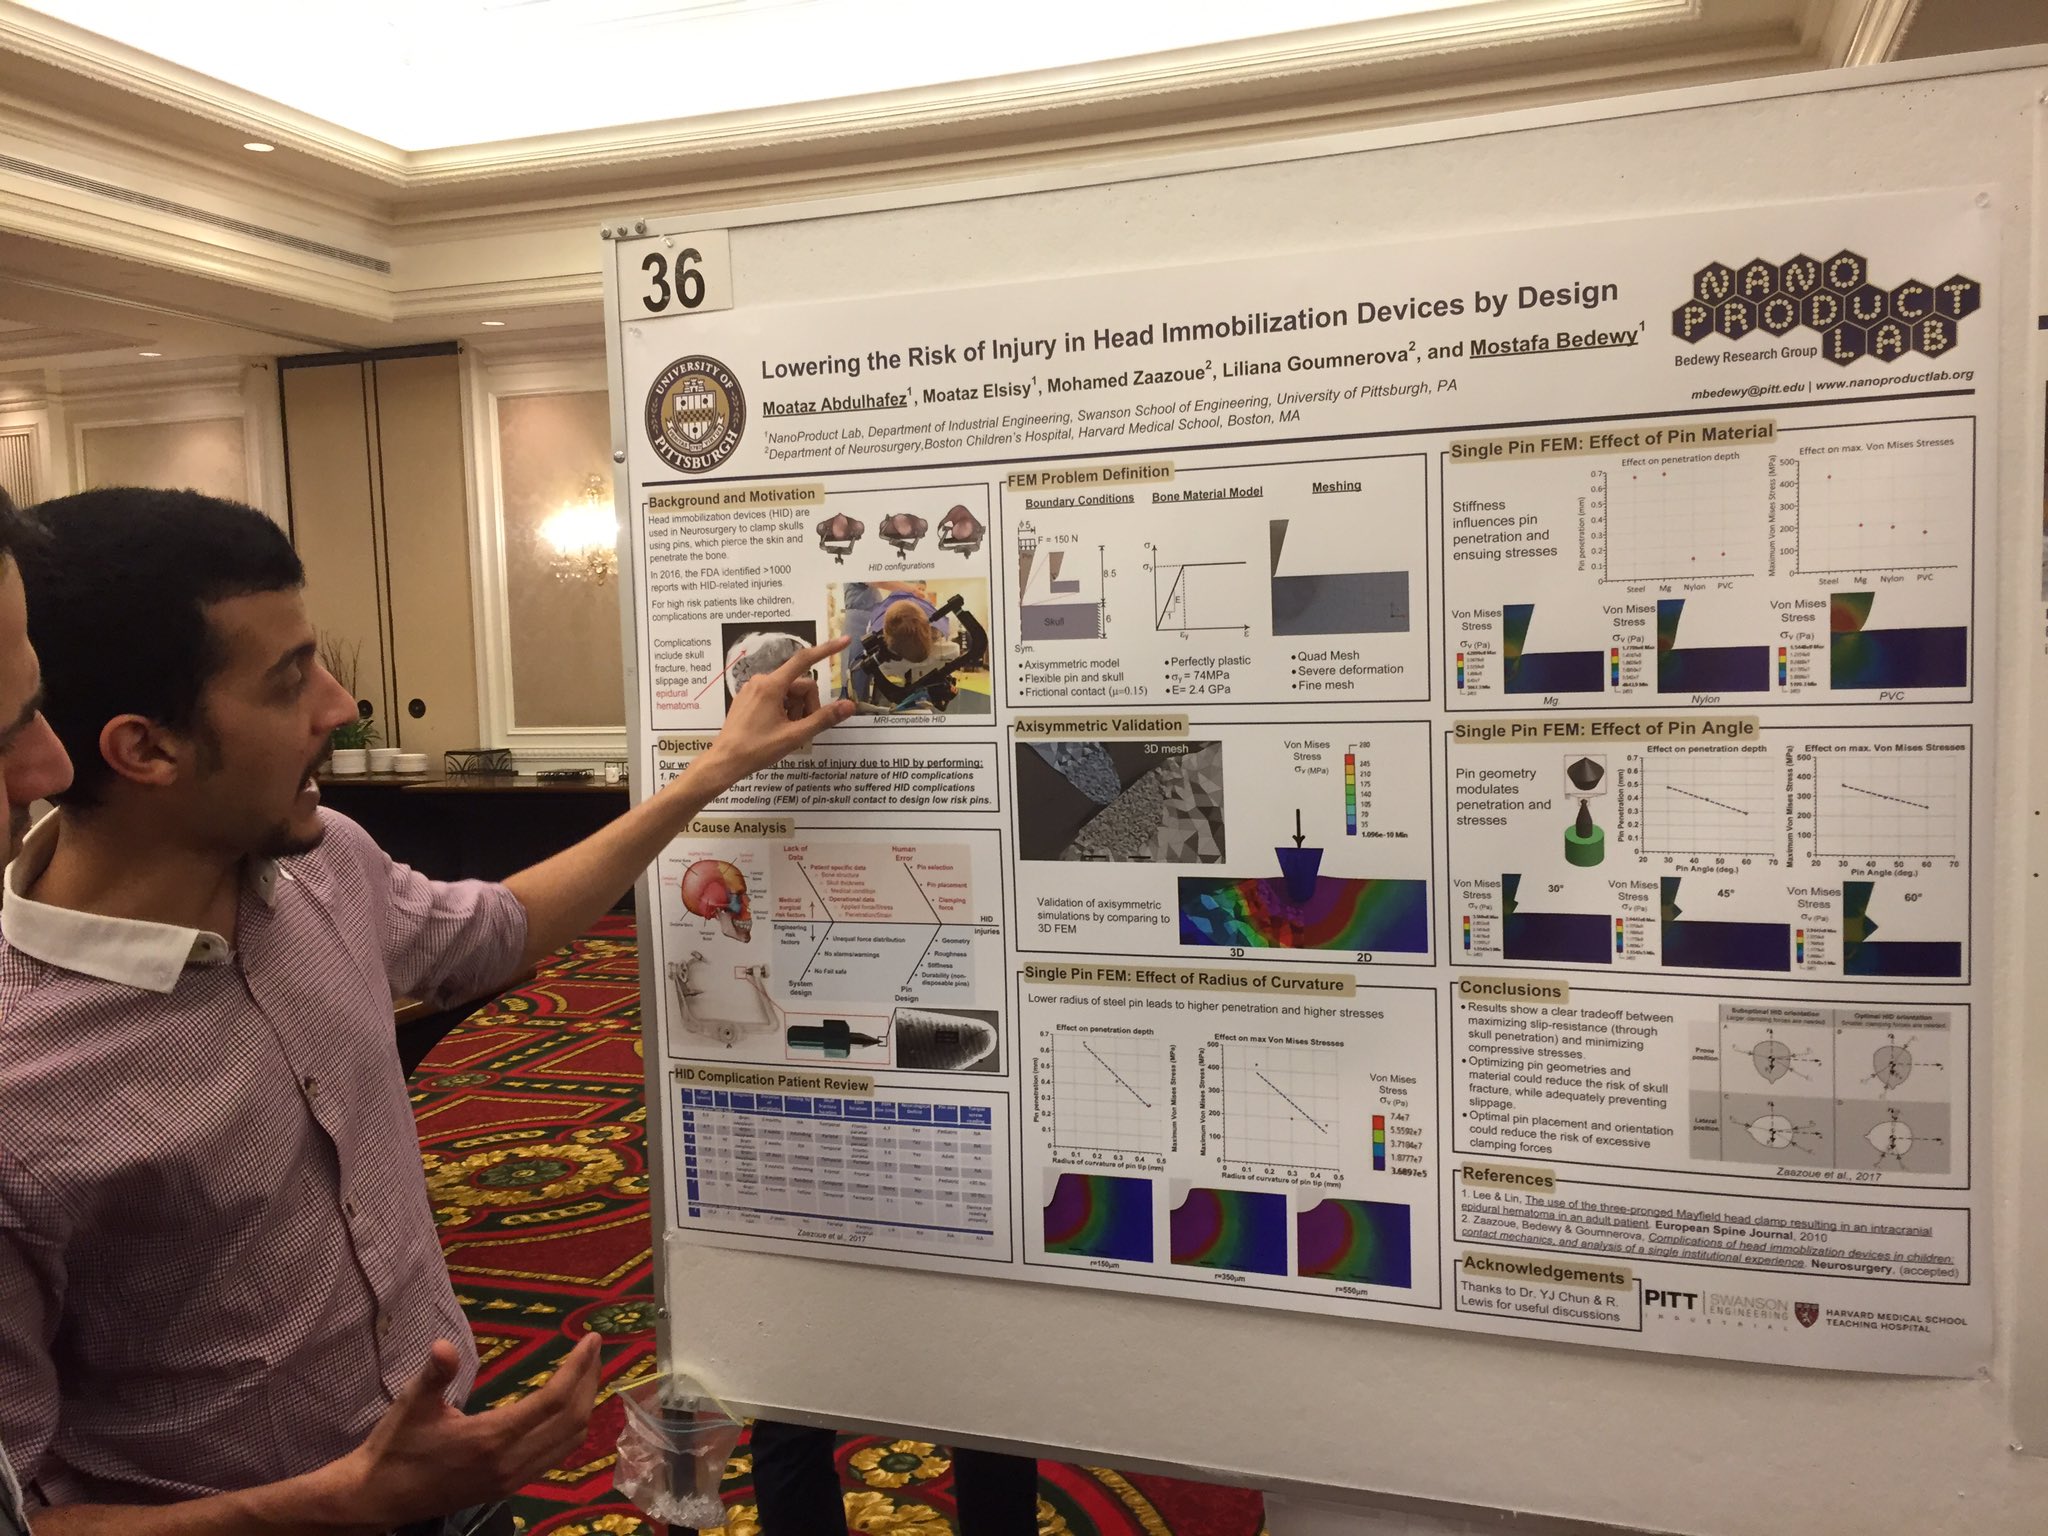 Moataz Abdulhafez presents a poster on the design and mechanics of a neurosurgical device